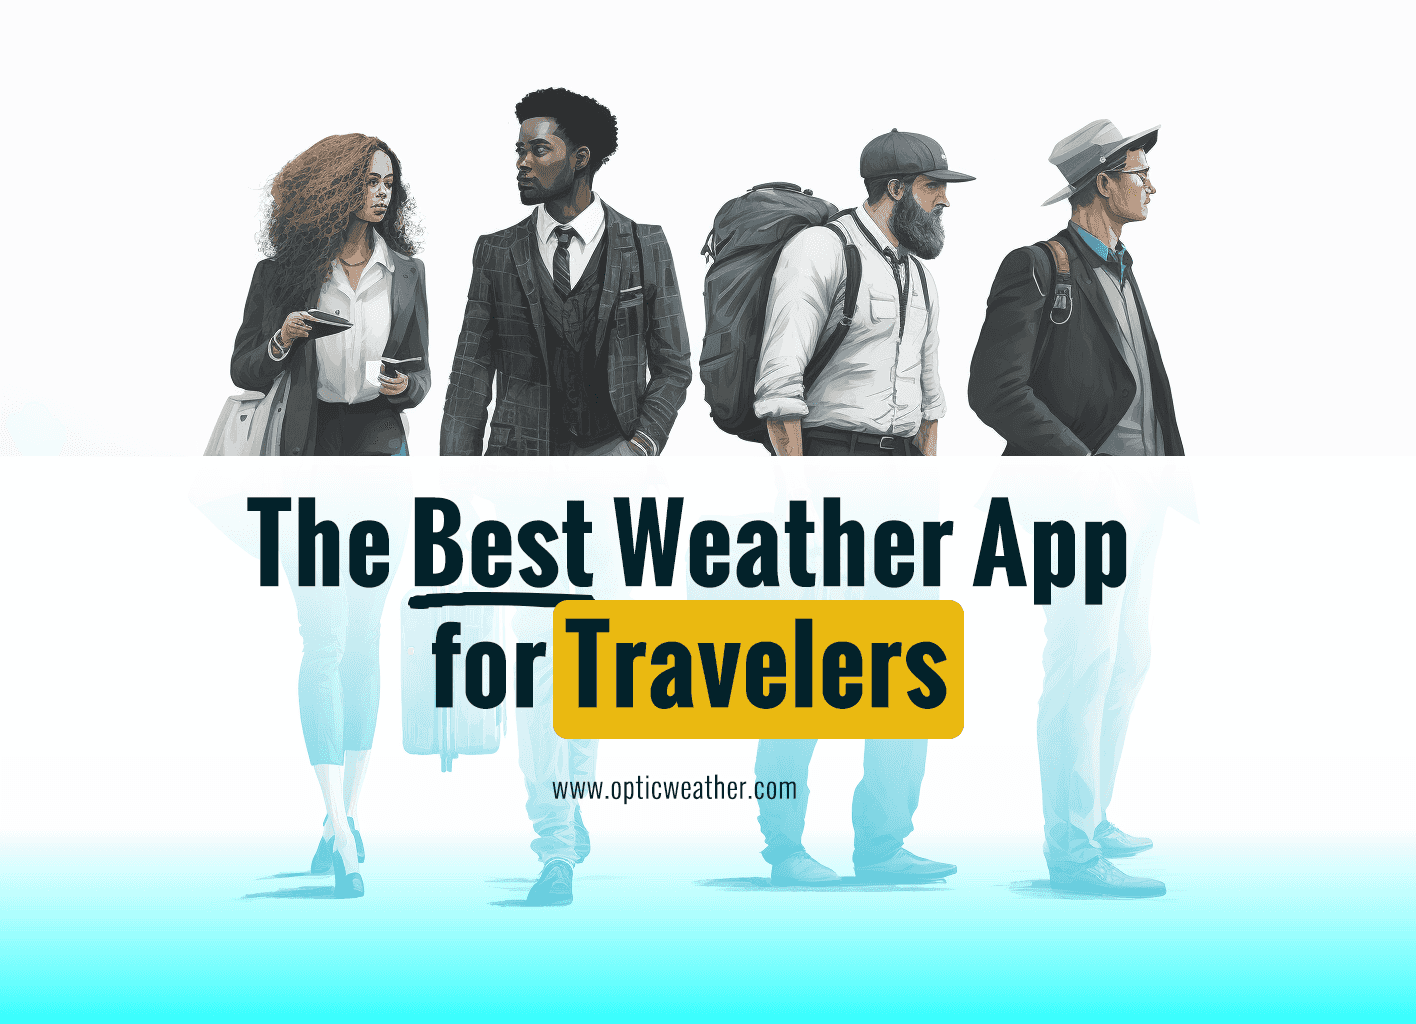 The Best weather app for travelers: How to stay prepared in any weather